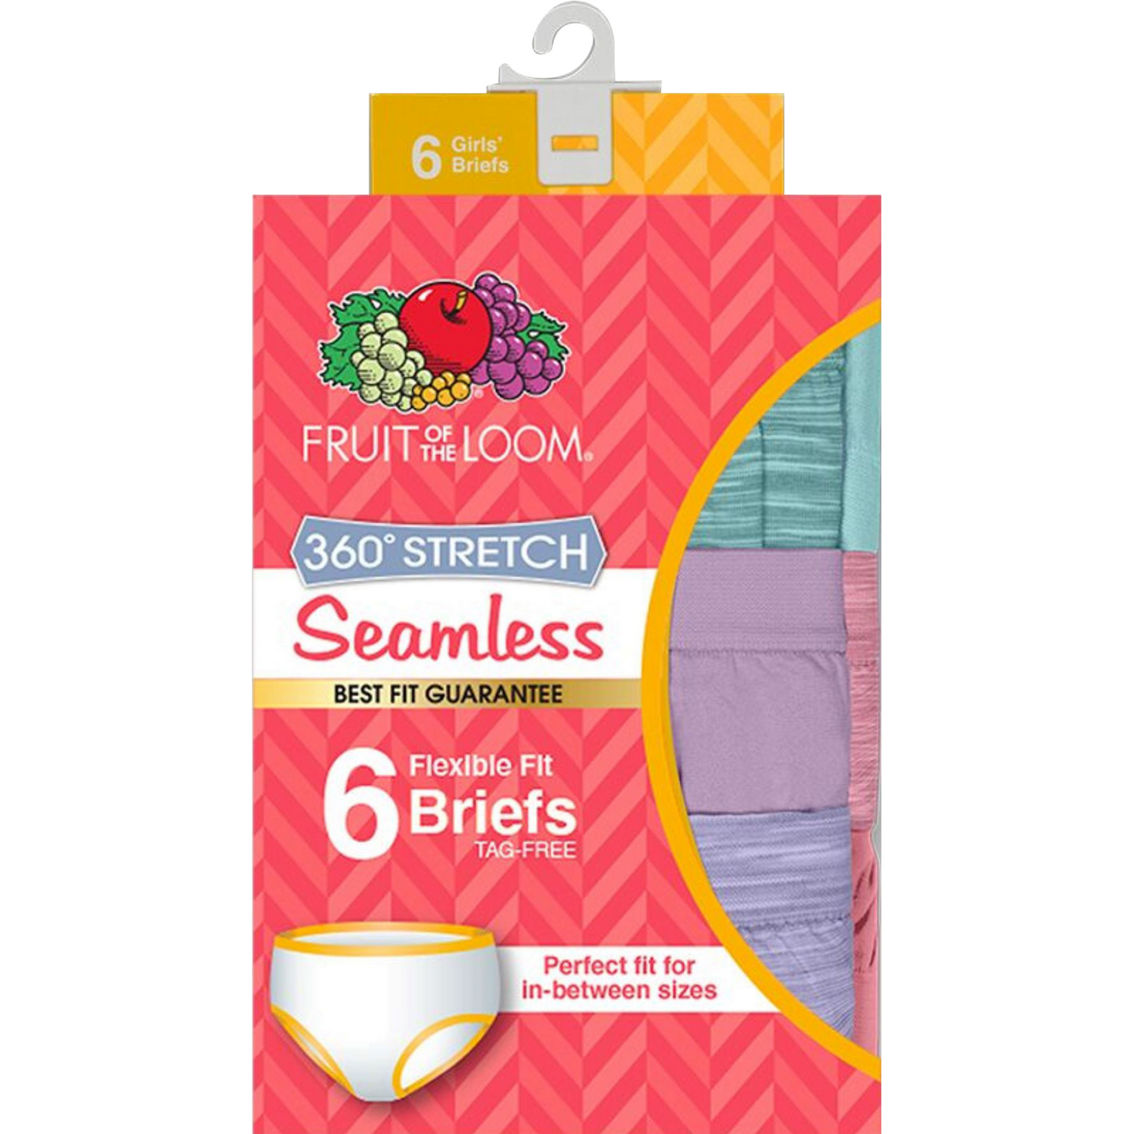 Fruit of the Loom Girls Seamless Briefs 6 pk. - Image 2 of 2